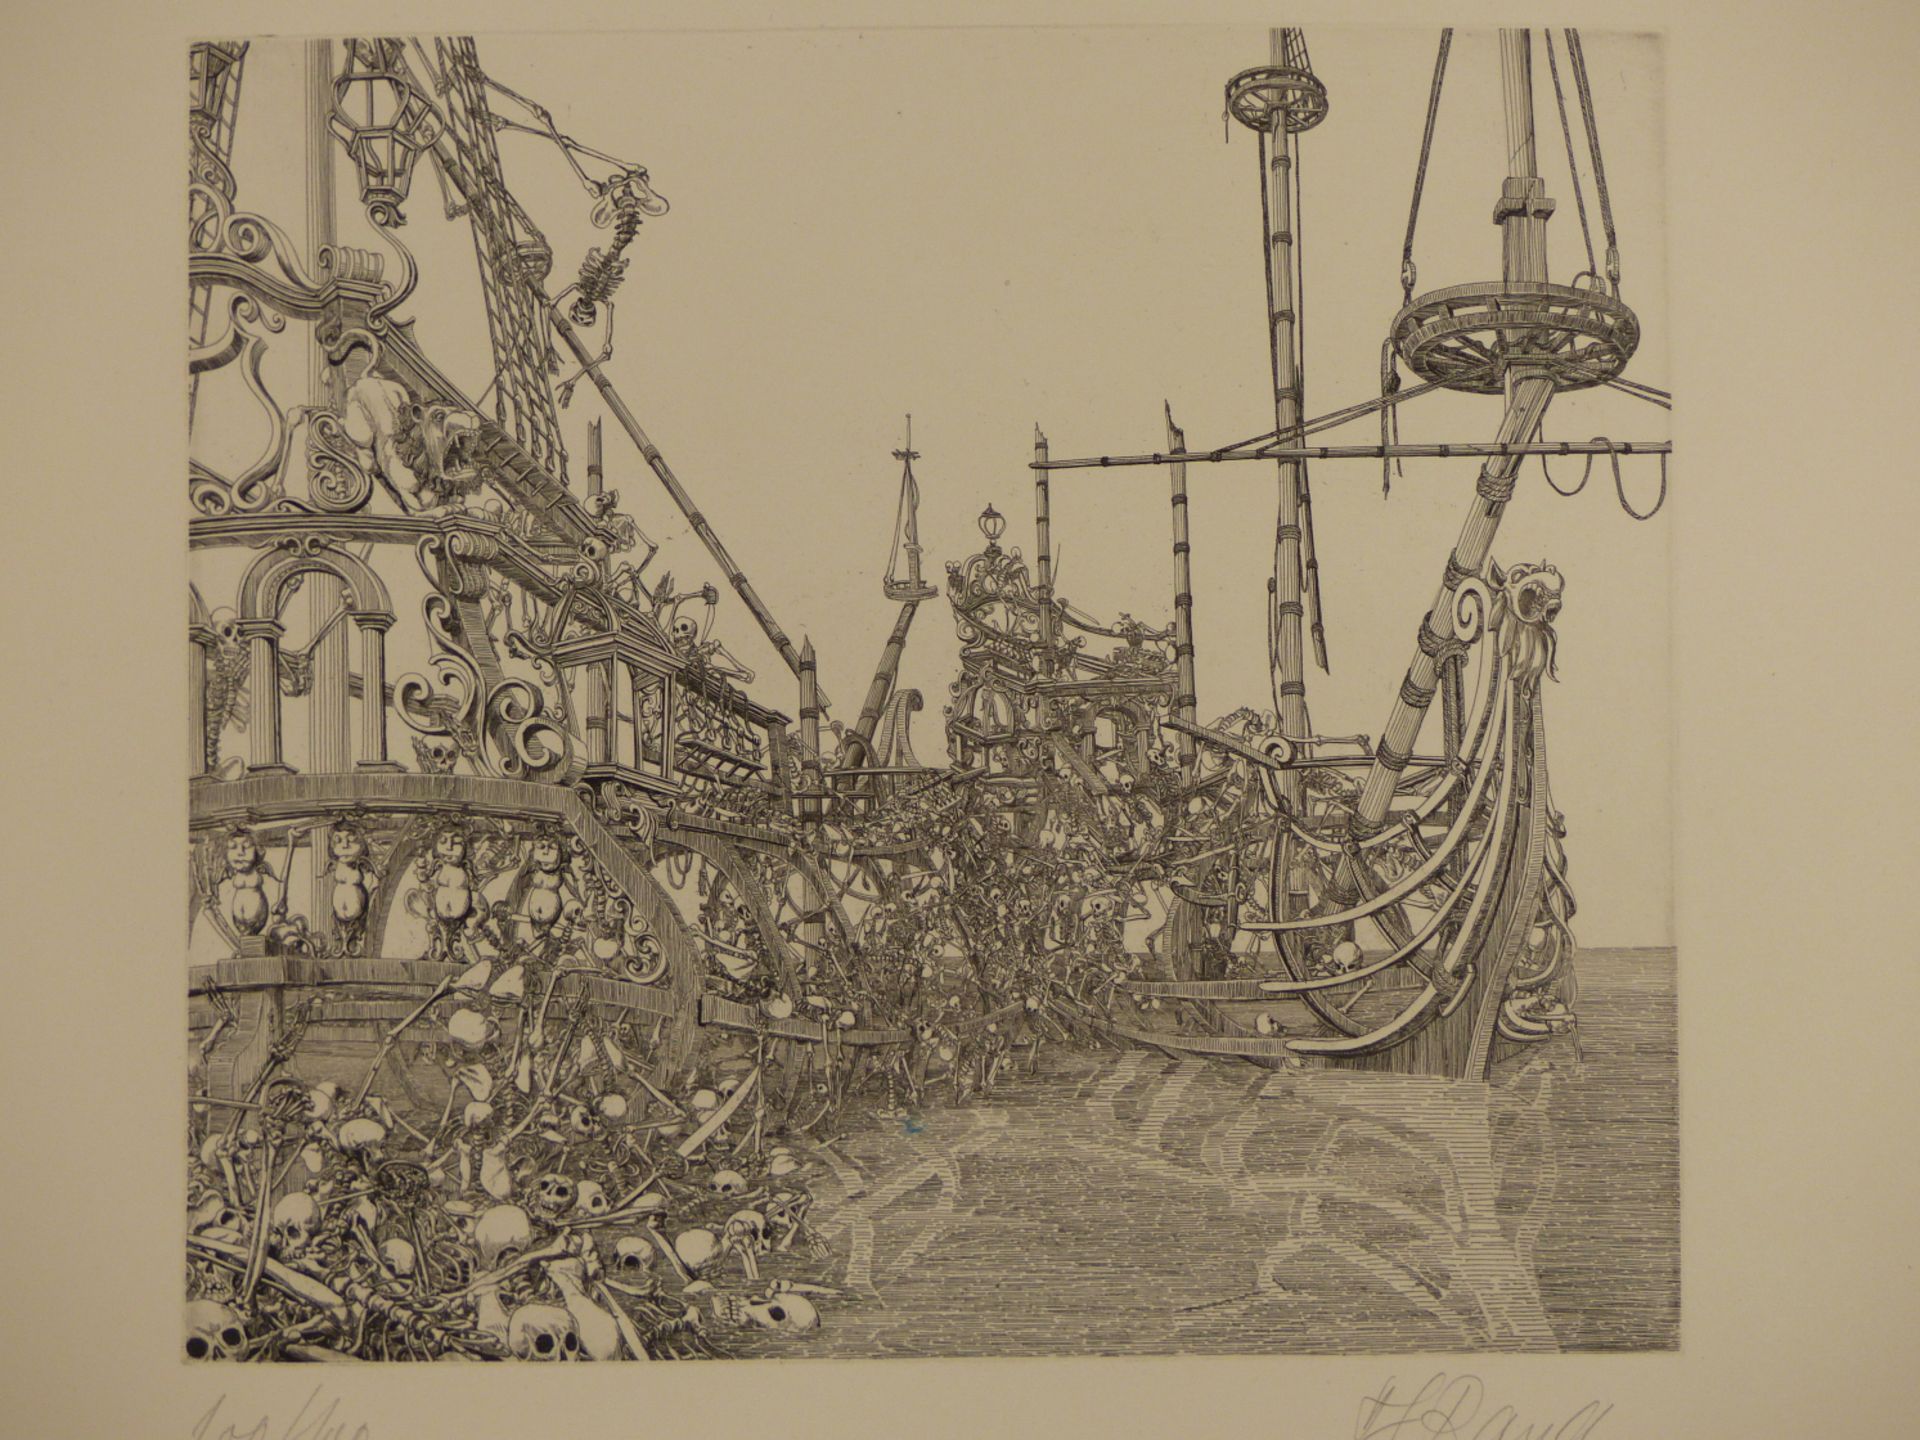 HANS GEORG RAUCH (1939-1993) ARR. SKELETAL SAILING VESSELS, ETCHING. PENCIL SIGNED LIMITED EDITION